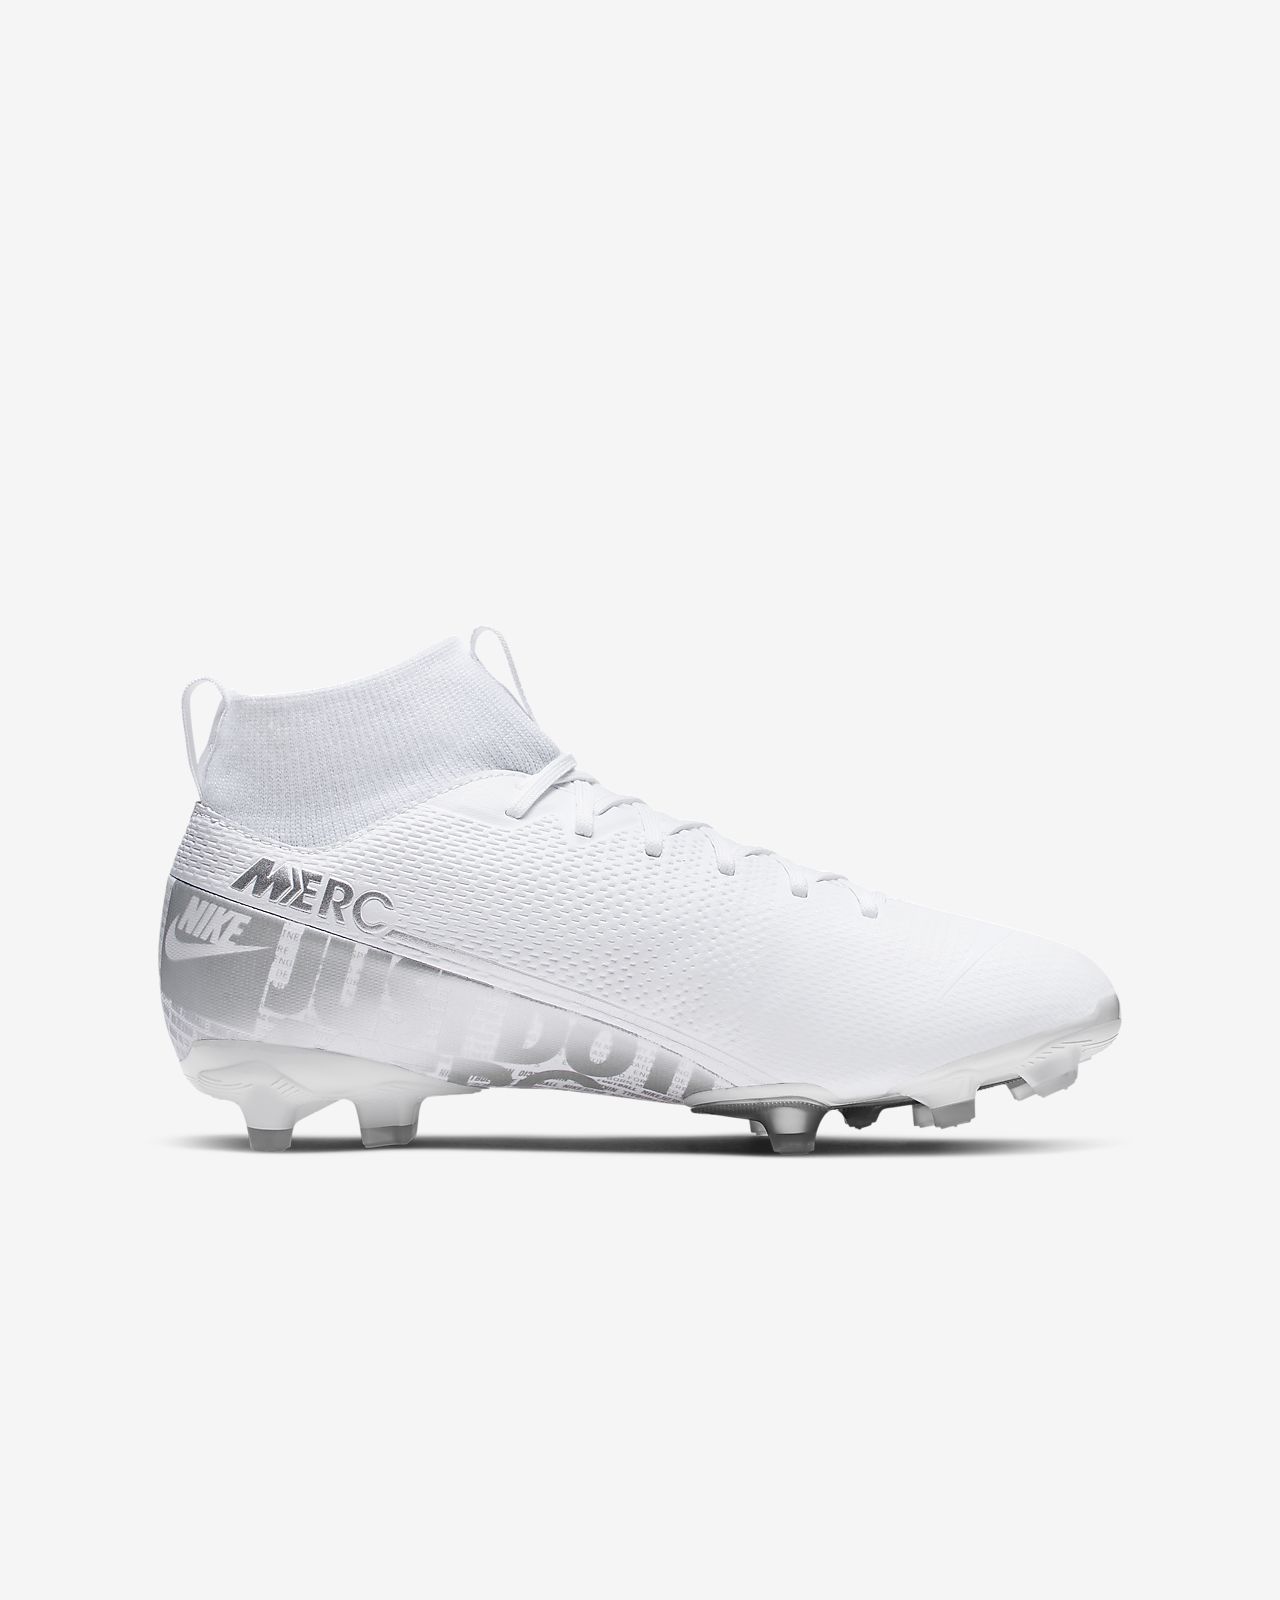 Nike Mercurial Superfly VII Academy Football Boots Rebel.